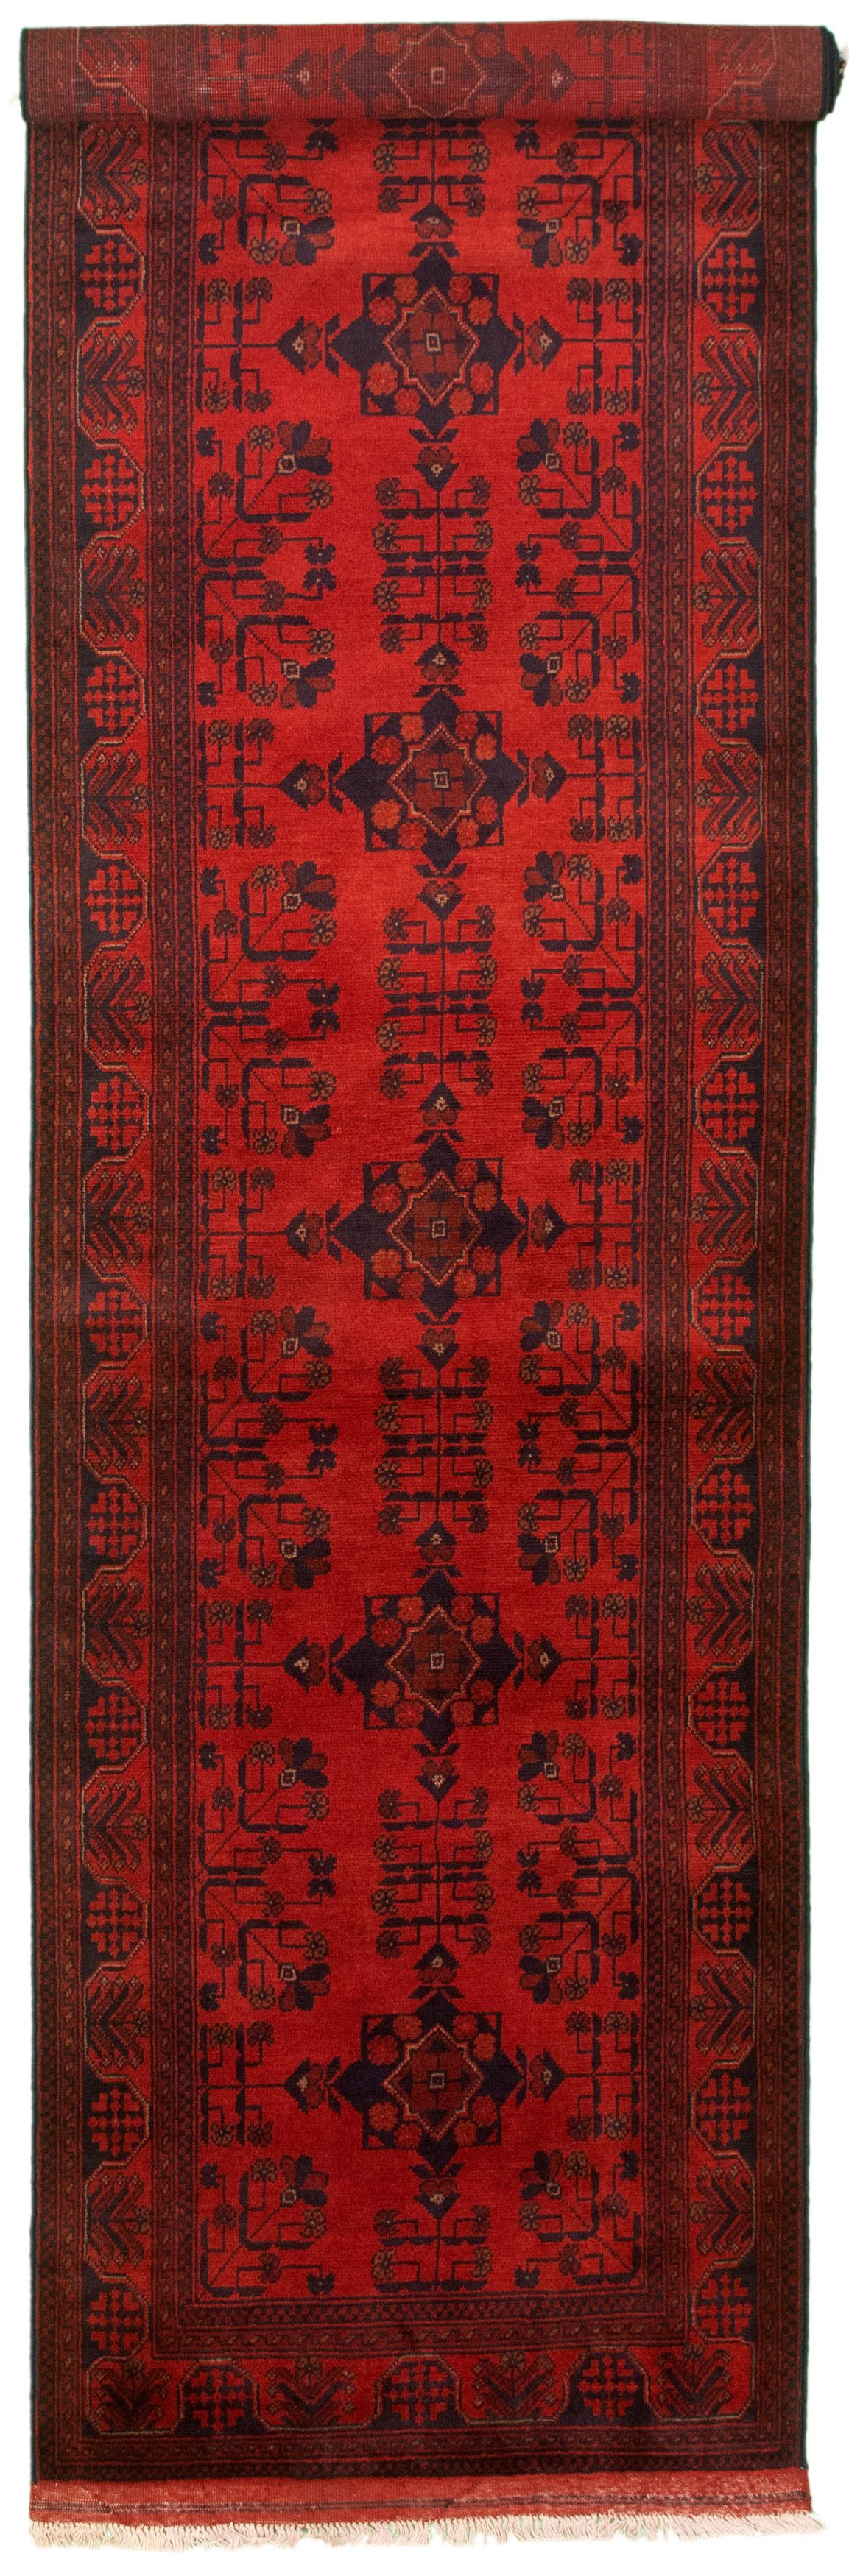 Hand-knotted Finest Khal Mohammadi Red Wool Rug 2'10" x 12'6" Size: 2'10" x 12'6"  